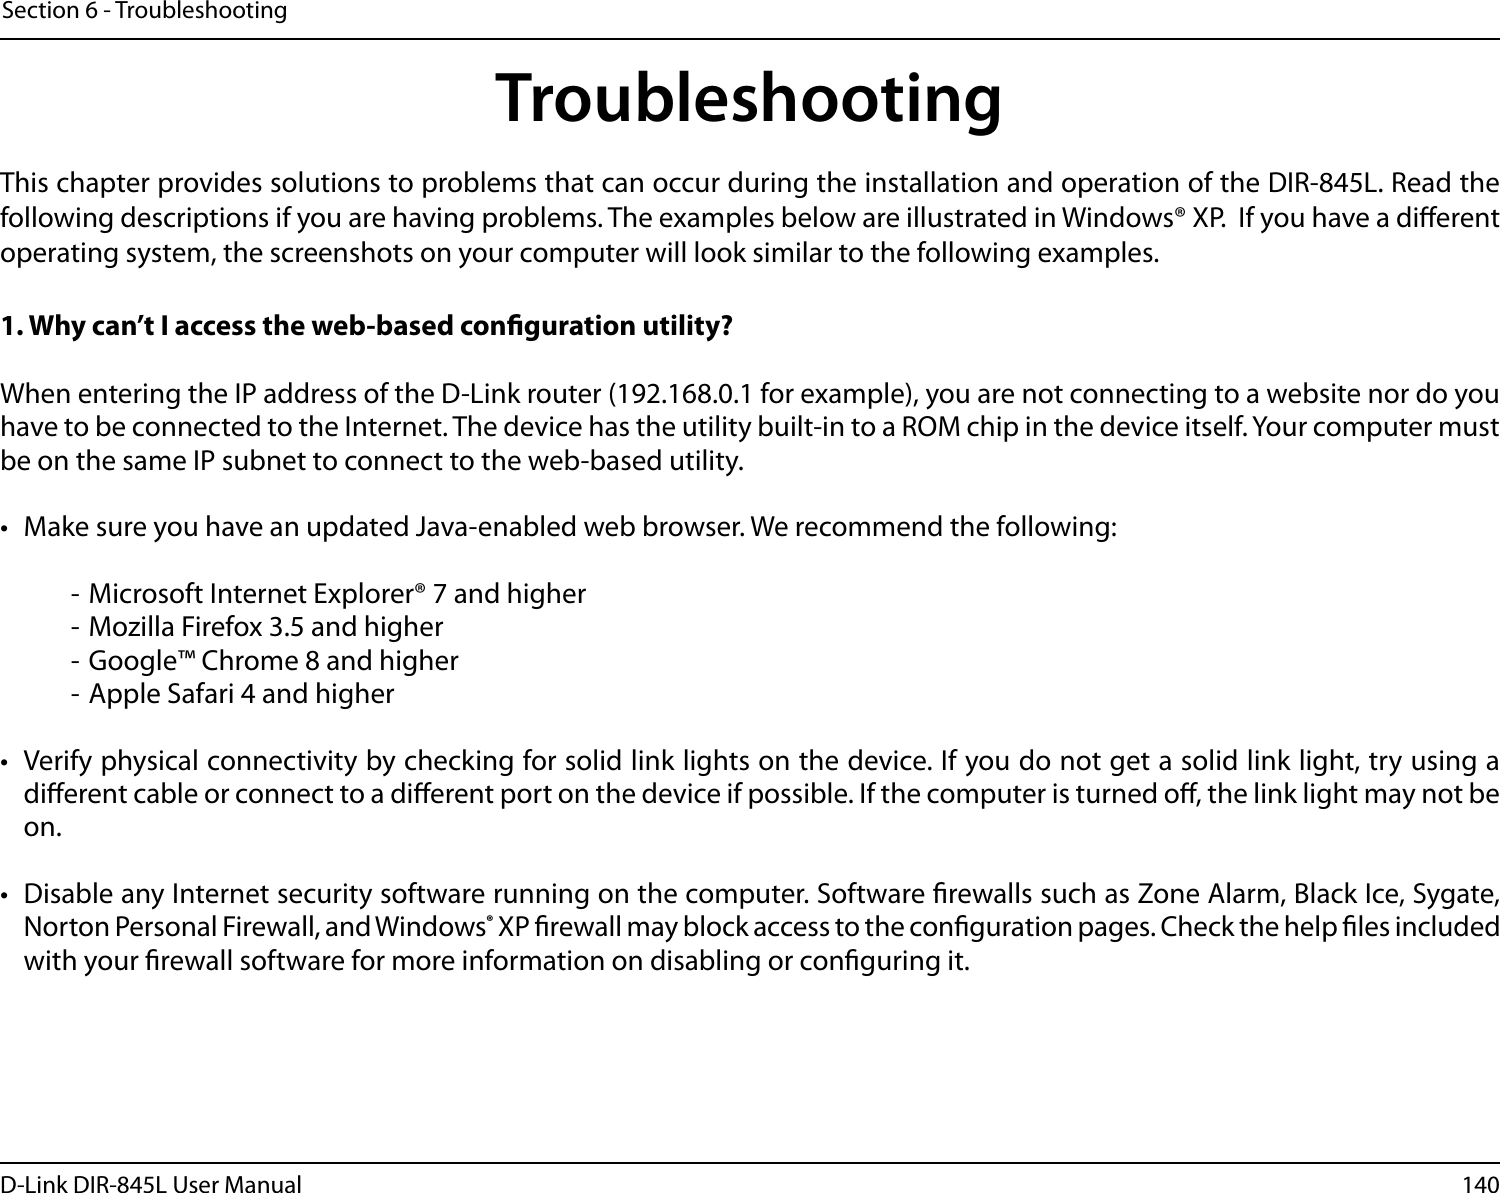 140D-Link DIR-845L User ManualSection 6 - TroubleshootingTroubleshootingThis chapter provides solutions to problems that can occur during the installation and operation of the DIR-845L. Read the following descriptions if you are having problems. The examples below are illustrated in Windows® XP.  If you have a dierent operating system, the screenshots on your computer will look similar to the following examples.1. Why can’t I access the web-based conguration utility?When entering the IP address of the D-Link router (192.168.0.1 for example), you are not connecting to a website nor do you have to be connected to the Internet. The device has the utility built-in to a ROM chip in the device itself. Your computer must be on the same IP subnet to connect to the web-based utility. •  Make sure you have an updated Java-enabled web browser. We recommend the following:  - Microsoft Internet Explorer® 7 and higher- Mozilla Firefox 3.5 and higher- Google™ Chrome 8 and higher- Apple Safari 4 and higher•  Verify physical connectivity by checking for solid link lights on the device. If you do not get a solid link light, try using a dierent cable or connect to a dierent port on the device if possible. If the computer is turned o, the link light may not be on.•  Disable any Internet security software running on the computer. Software rewalls such as Zone Alarm, Black Ice, Sygate, Norton Personal Firewall, and Windows® XP rewall may block access to the conguration pages. Check the help les included with your rewall software for more information on disabling or conguring it.